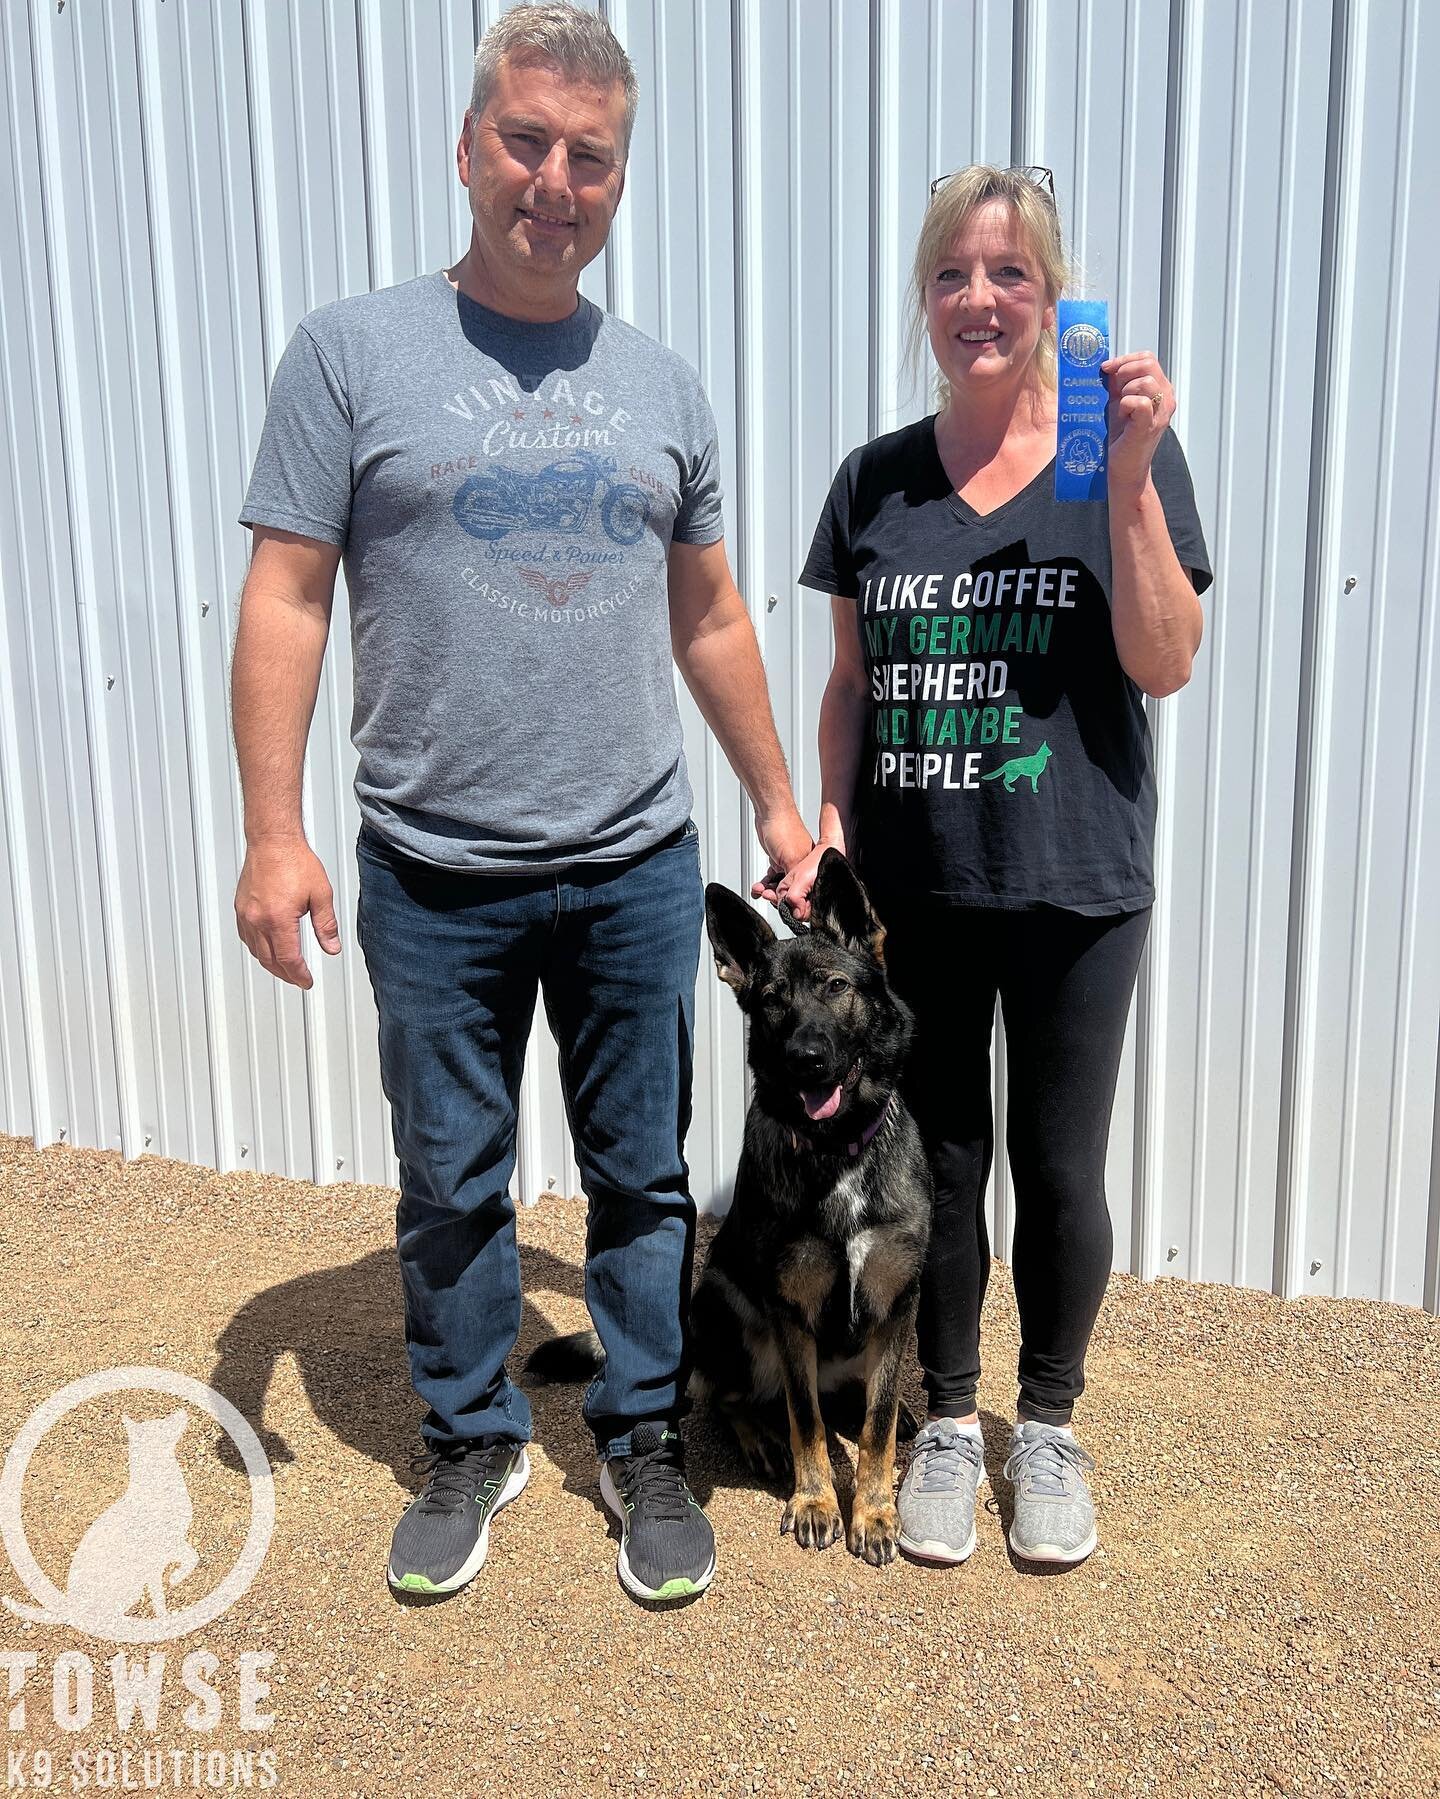 Congratulations to Sasha and her owners for passing their CGC with flying colors this weekend! They have been training with us since Sasha was a young puppy and they have done a great job helping her become a well mannered young lady 🤩

Fun fact: Sa